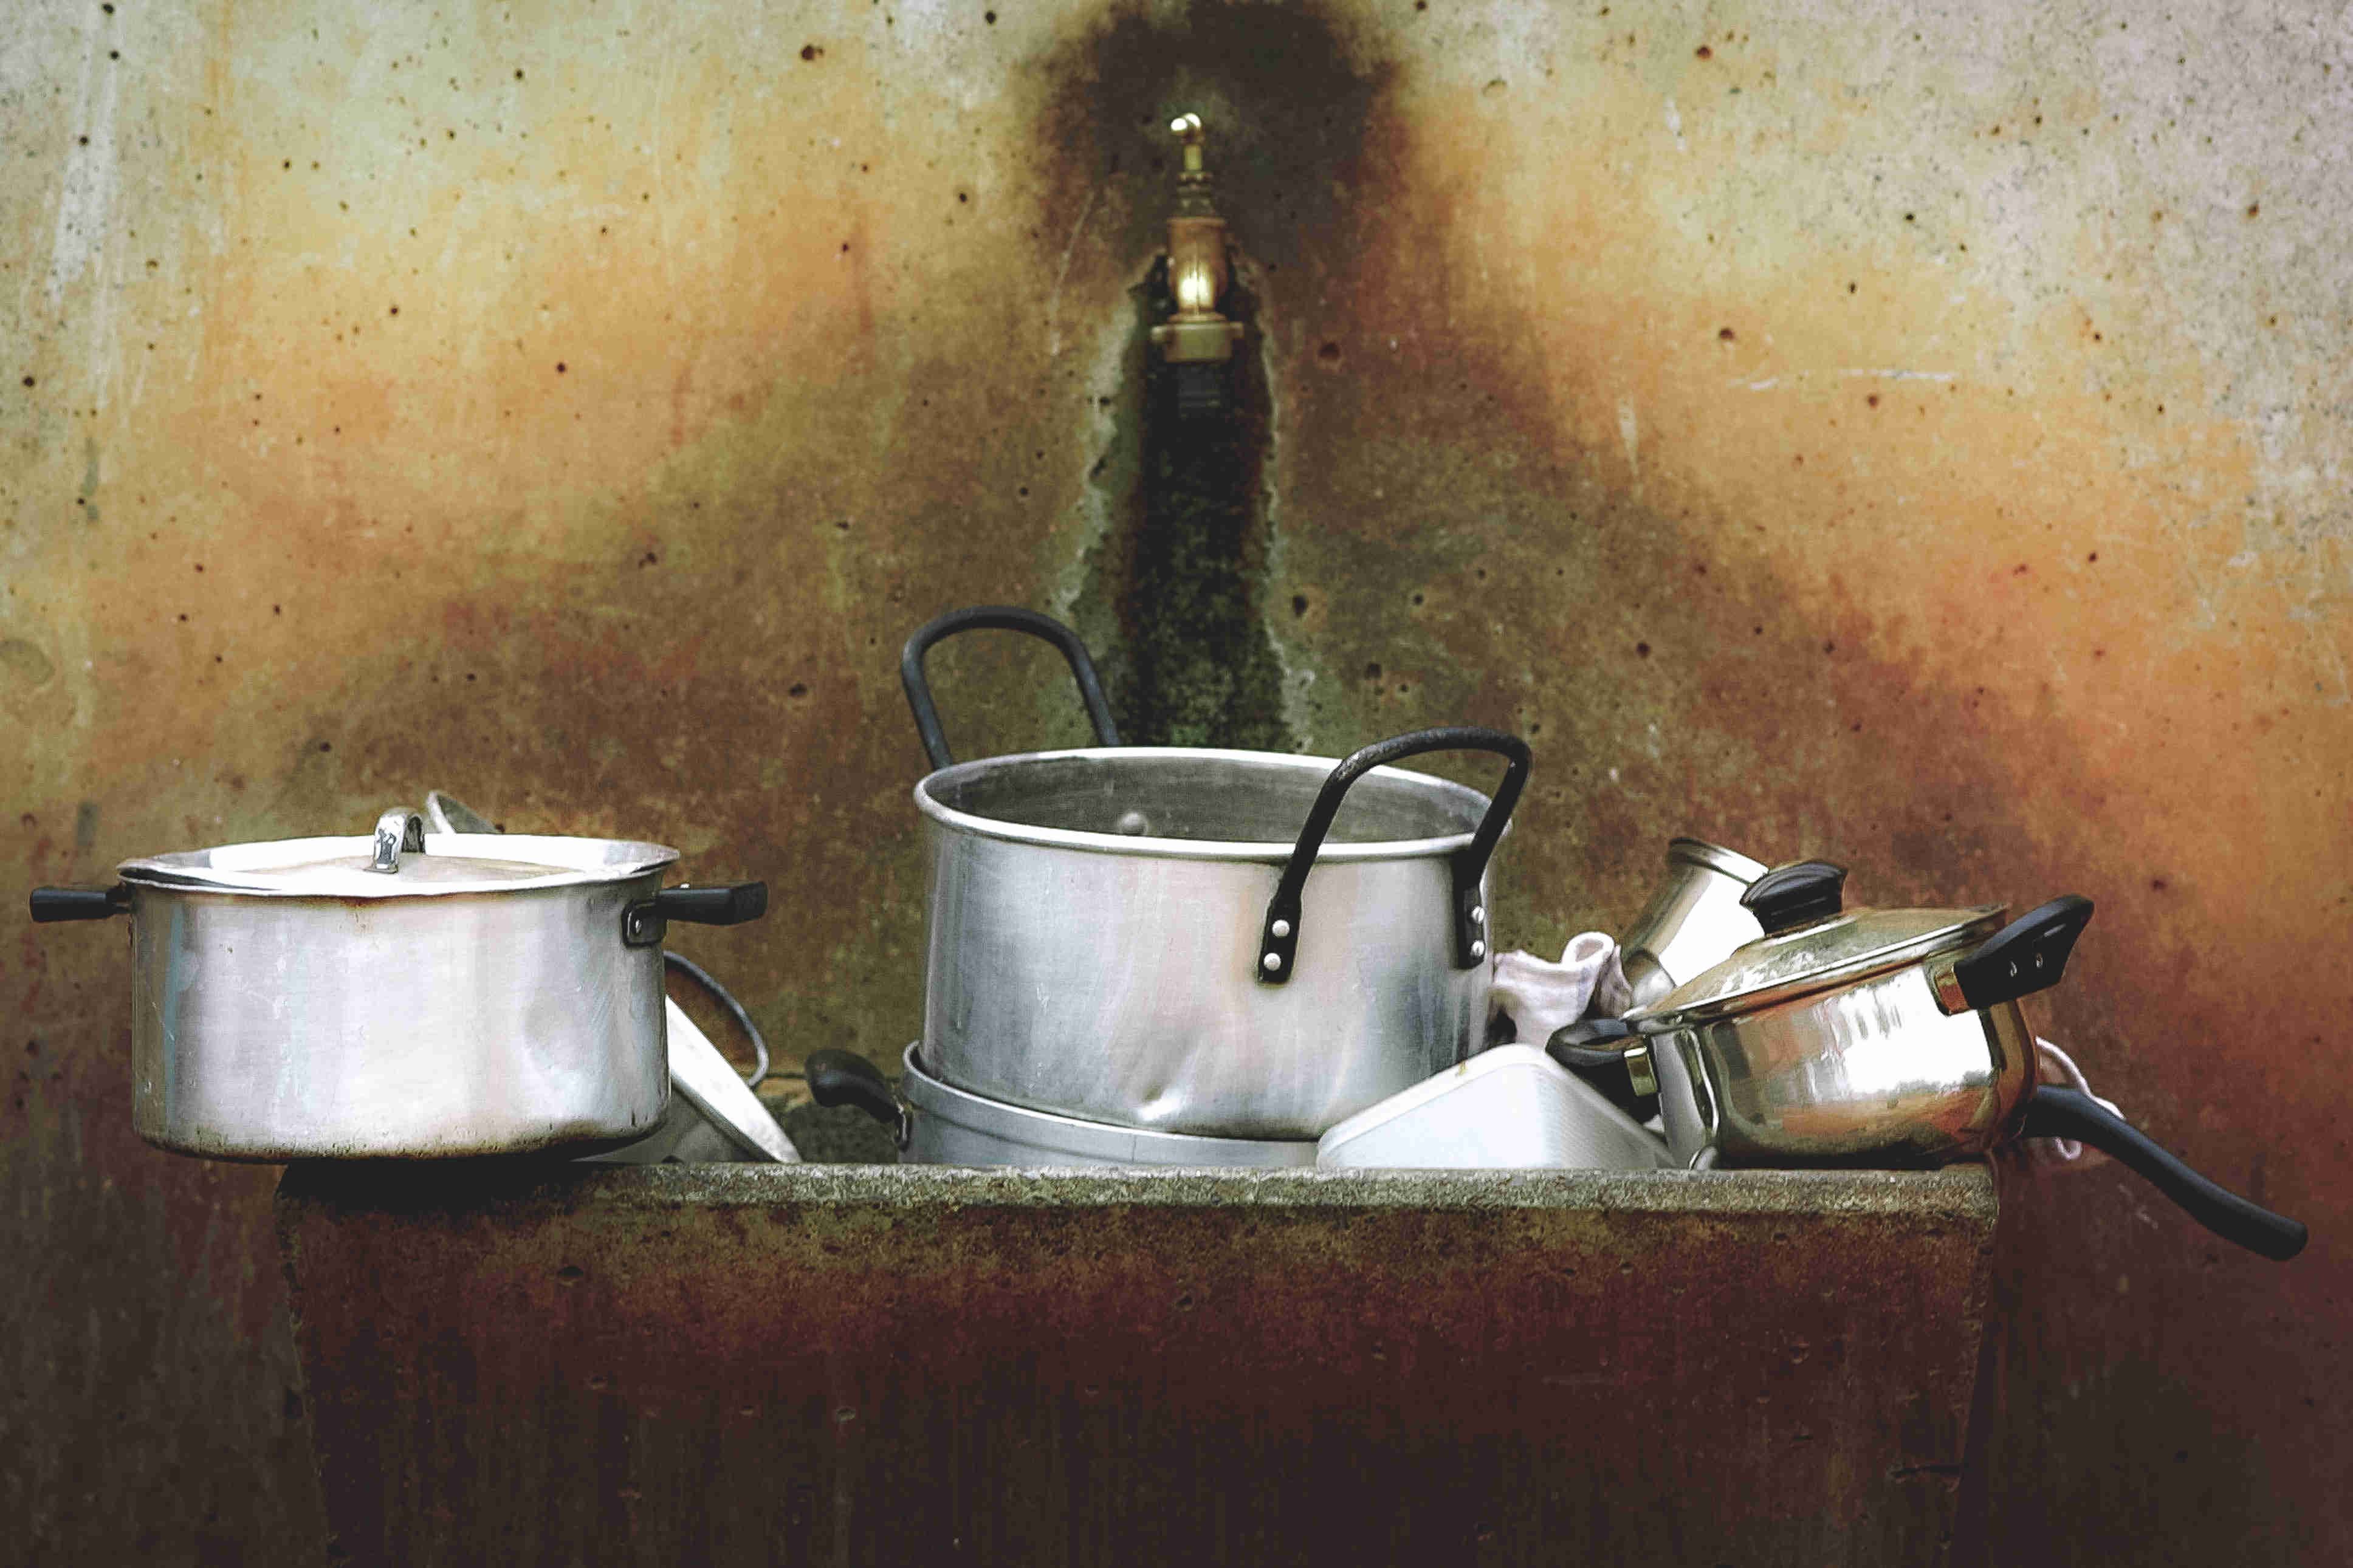 dirty pots and pans - image by Scott Umstattd